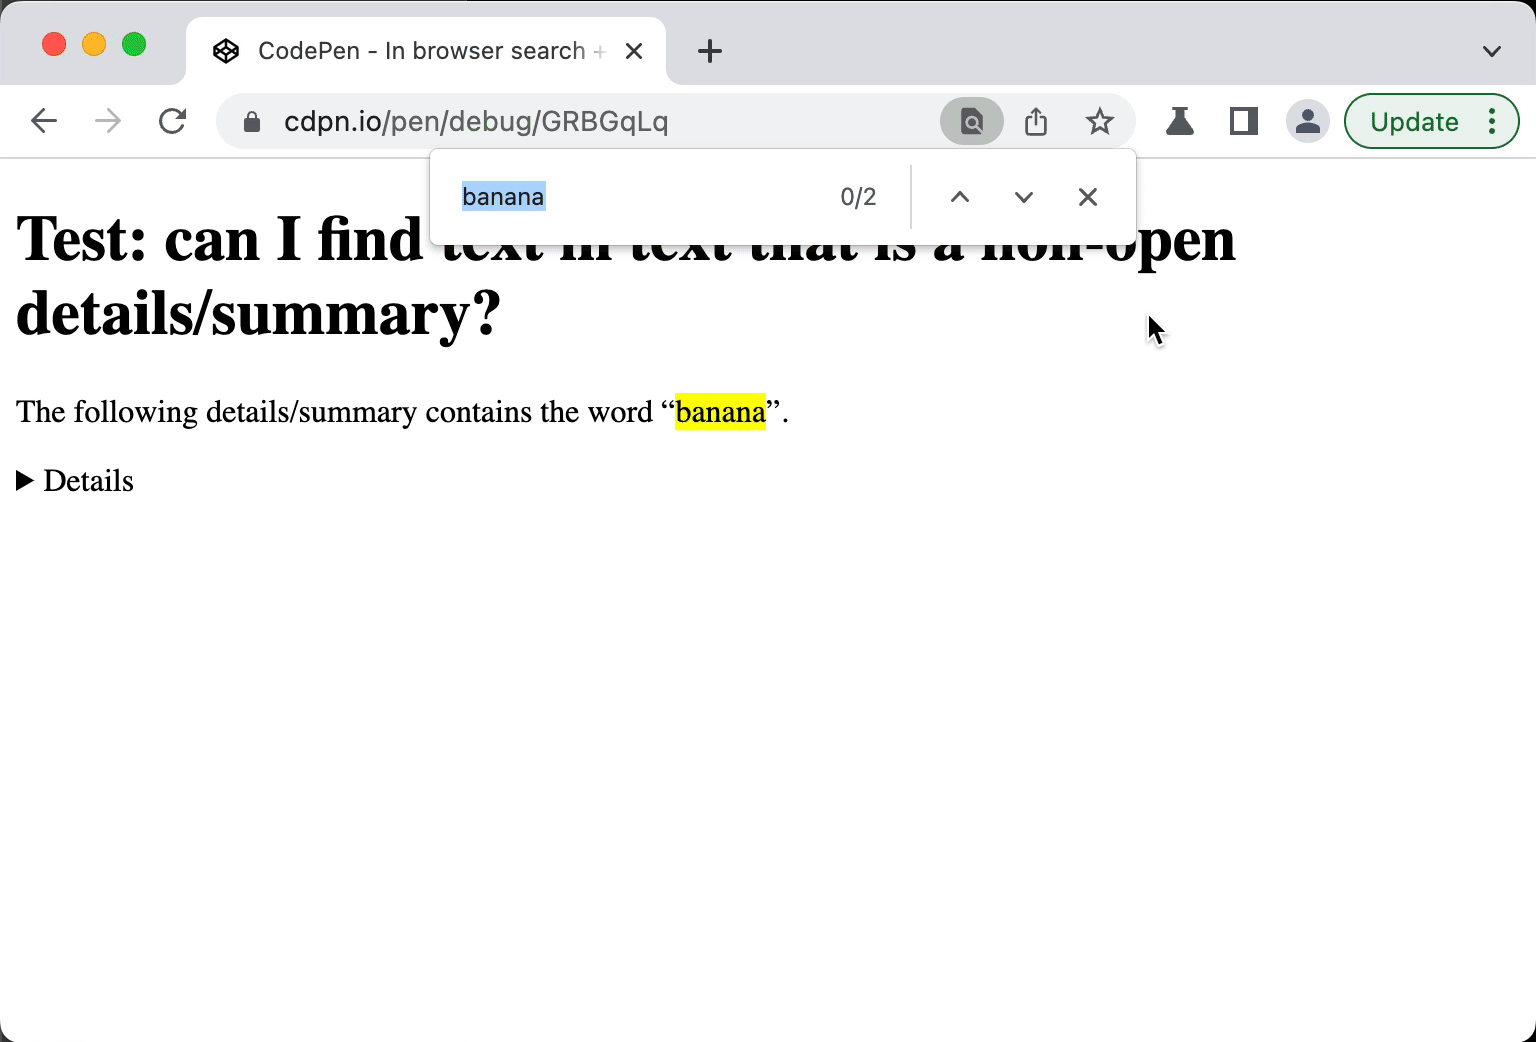 page titled “Test: can I find text in text that is a non-open details/summary?”, user searches for the word banana, first find is in visible text, second find triggers details/summary to open